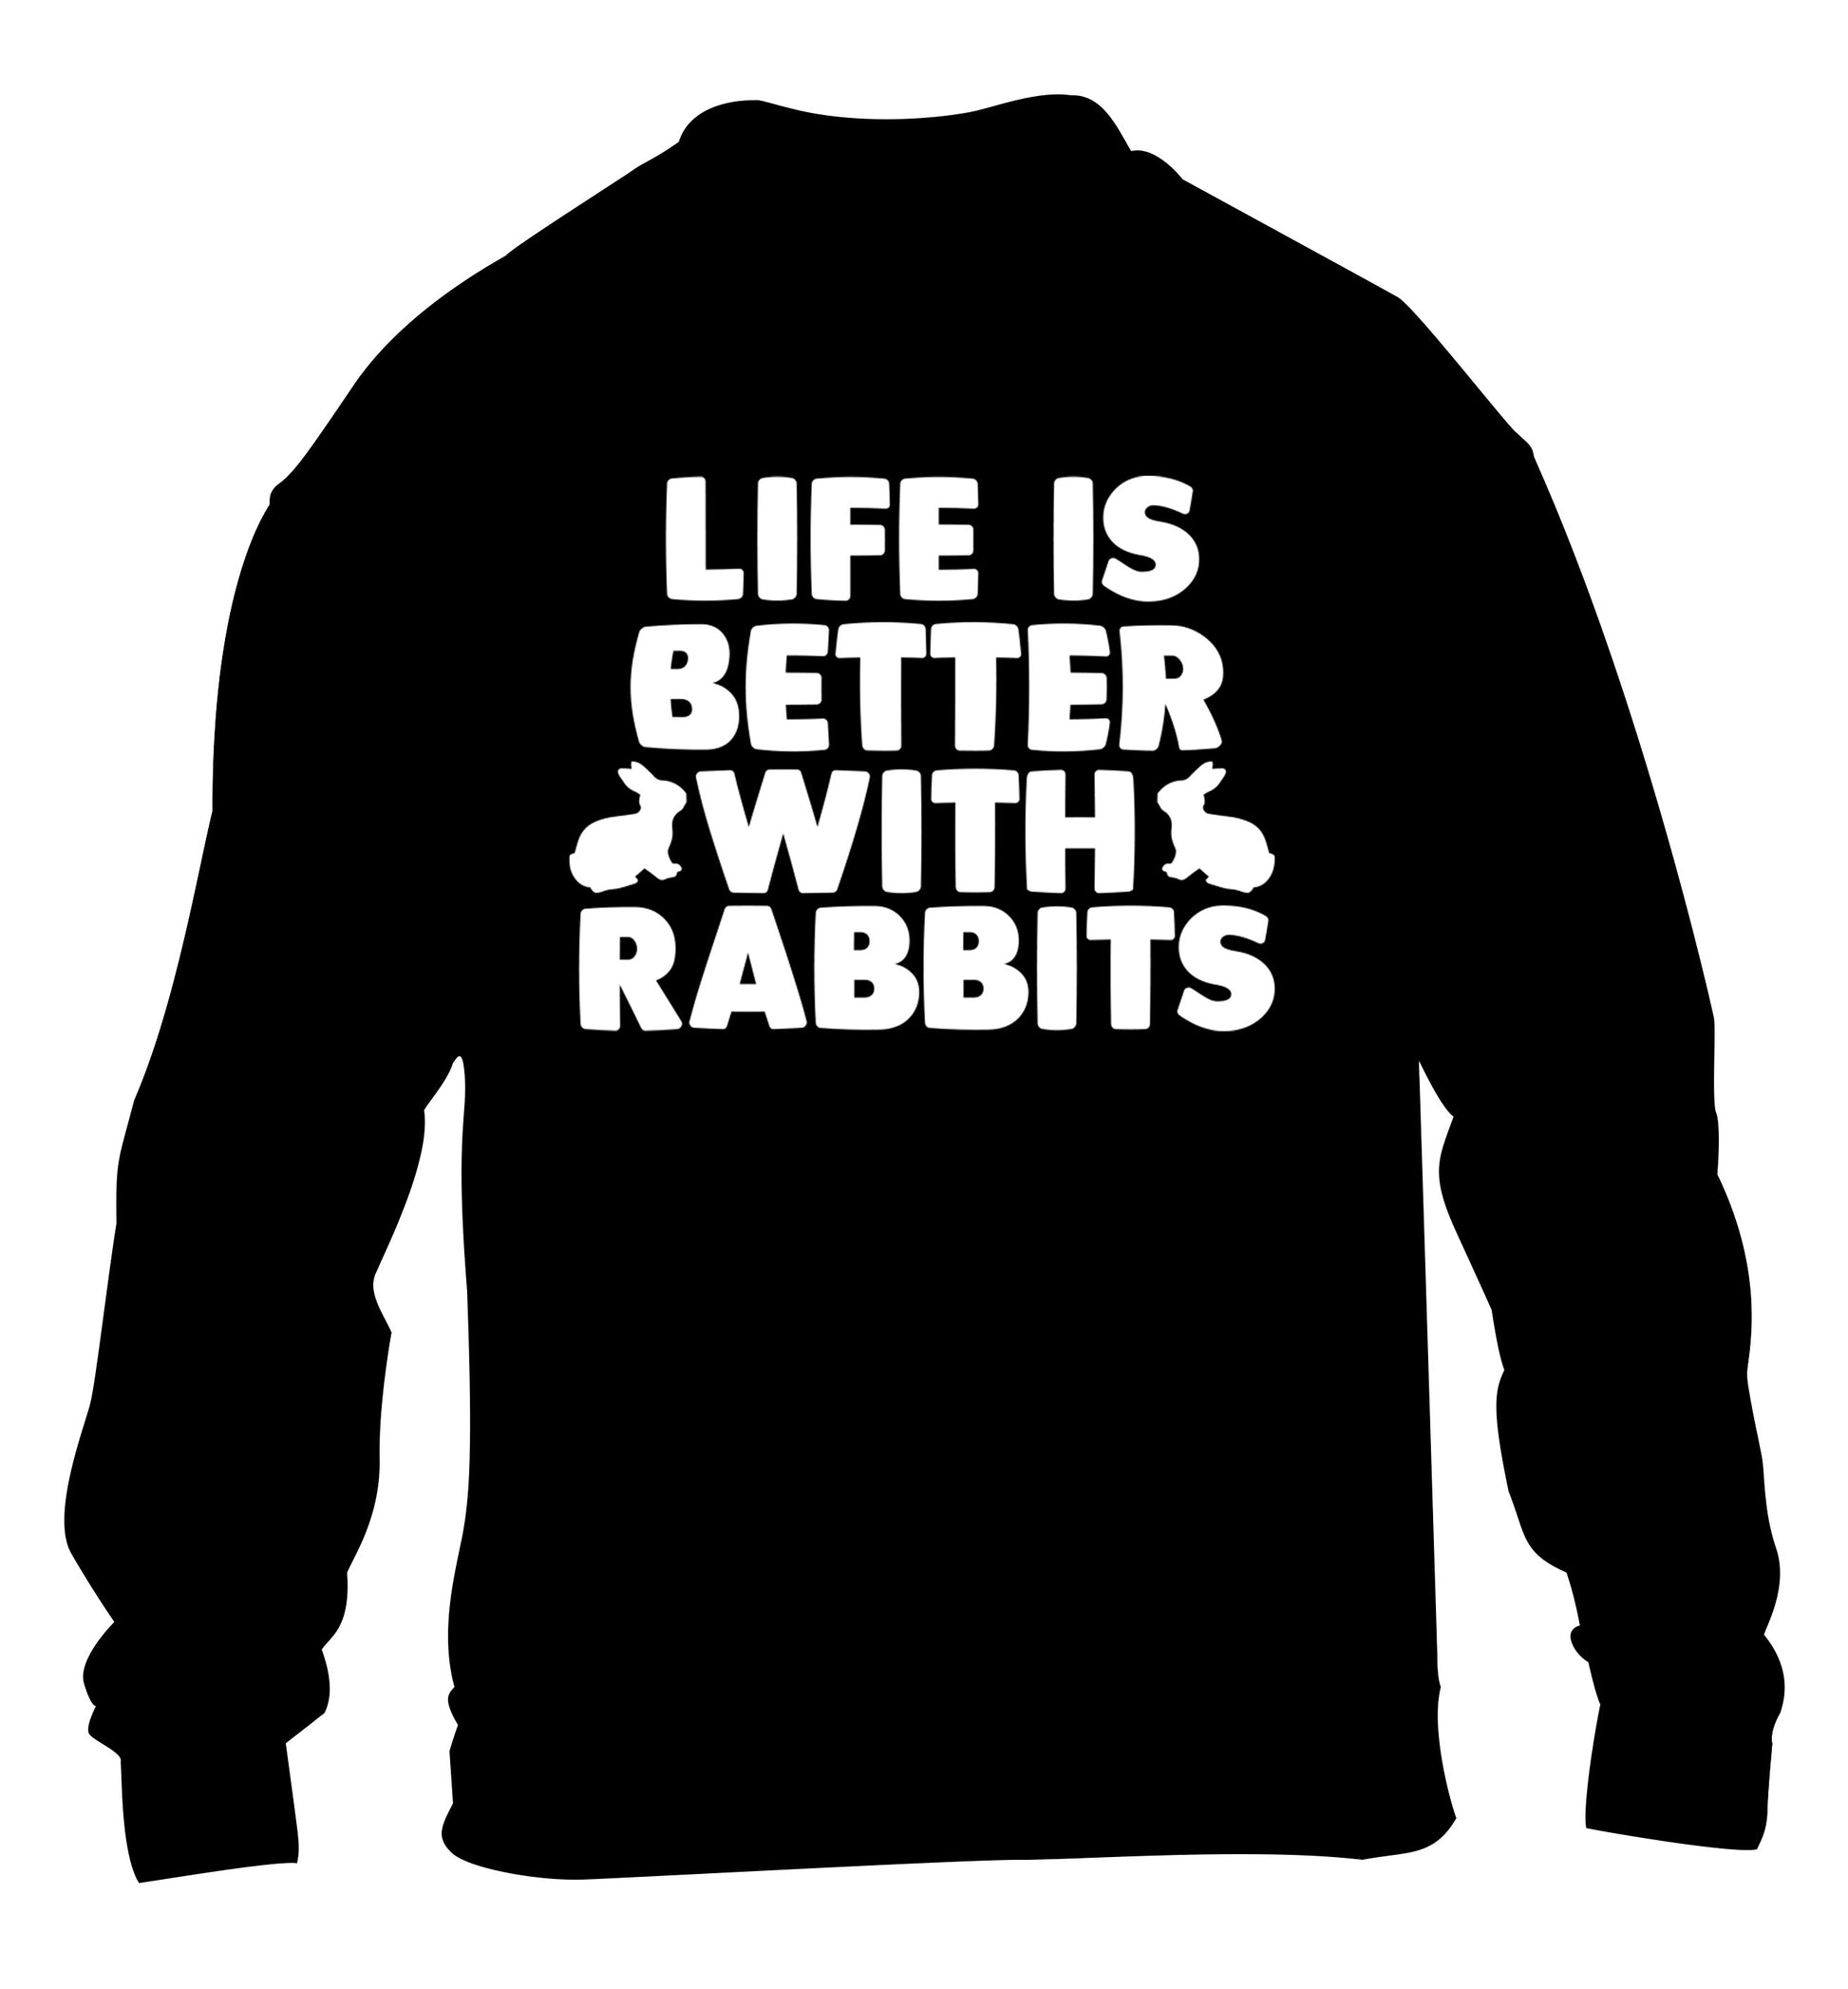 Life is better with rabbits children's black  sweater 12-14 Years